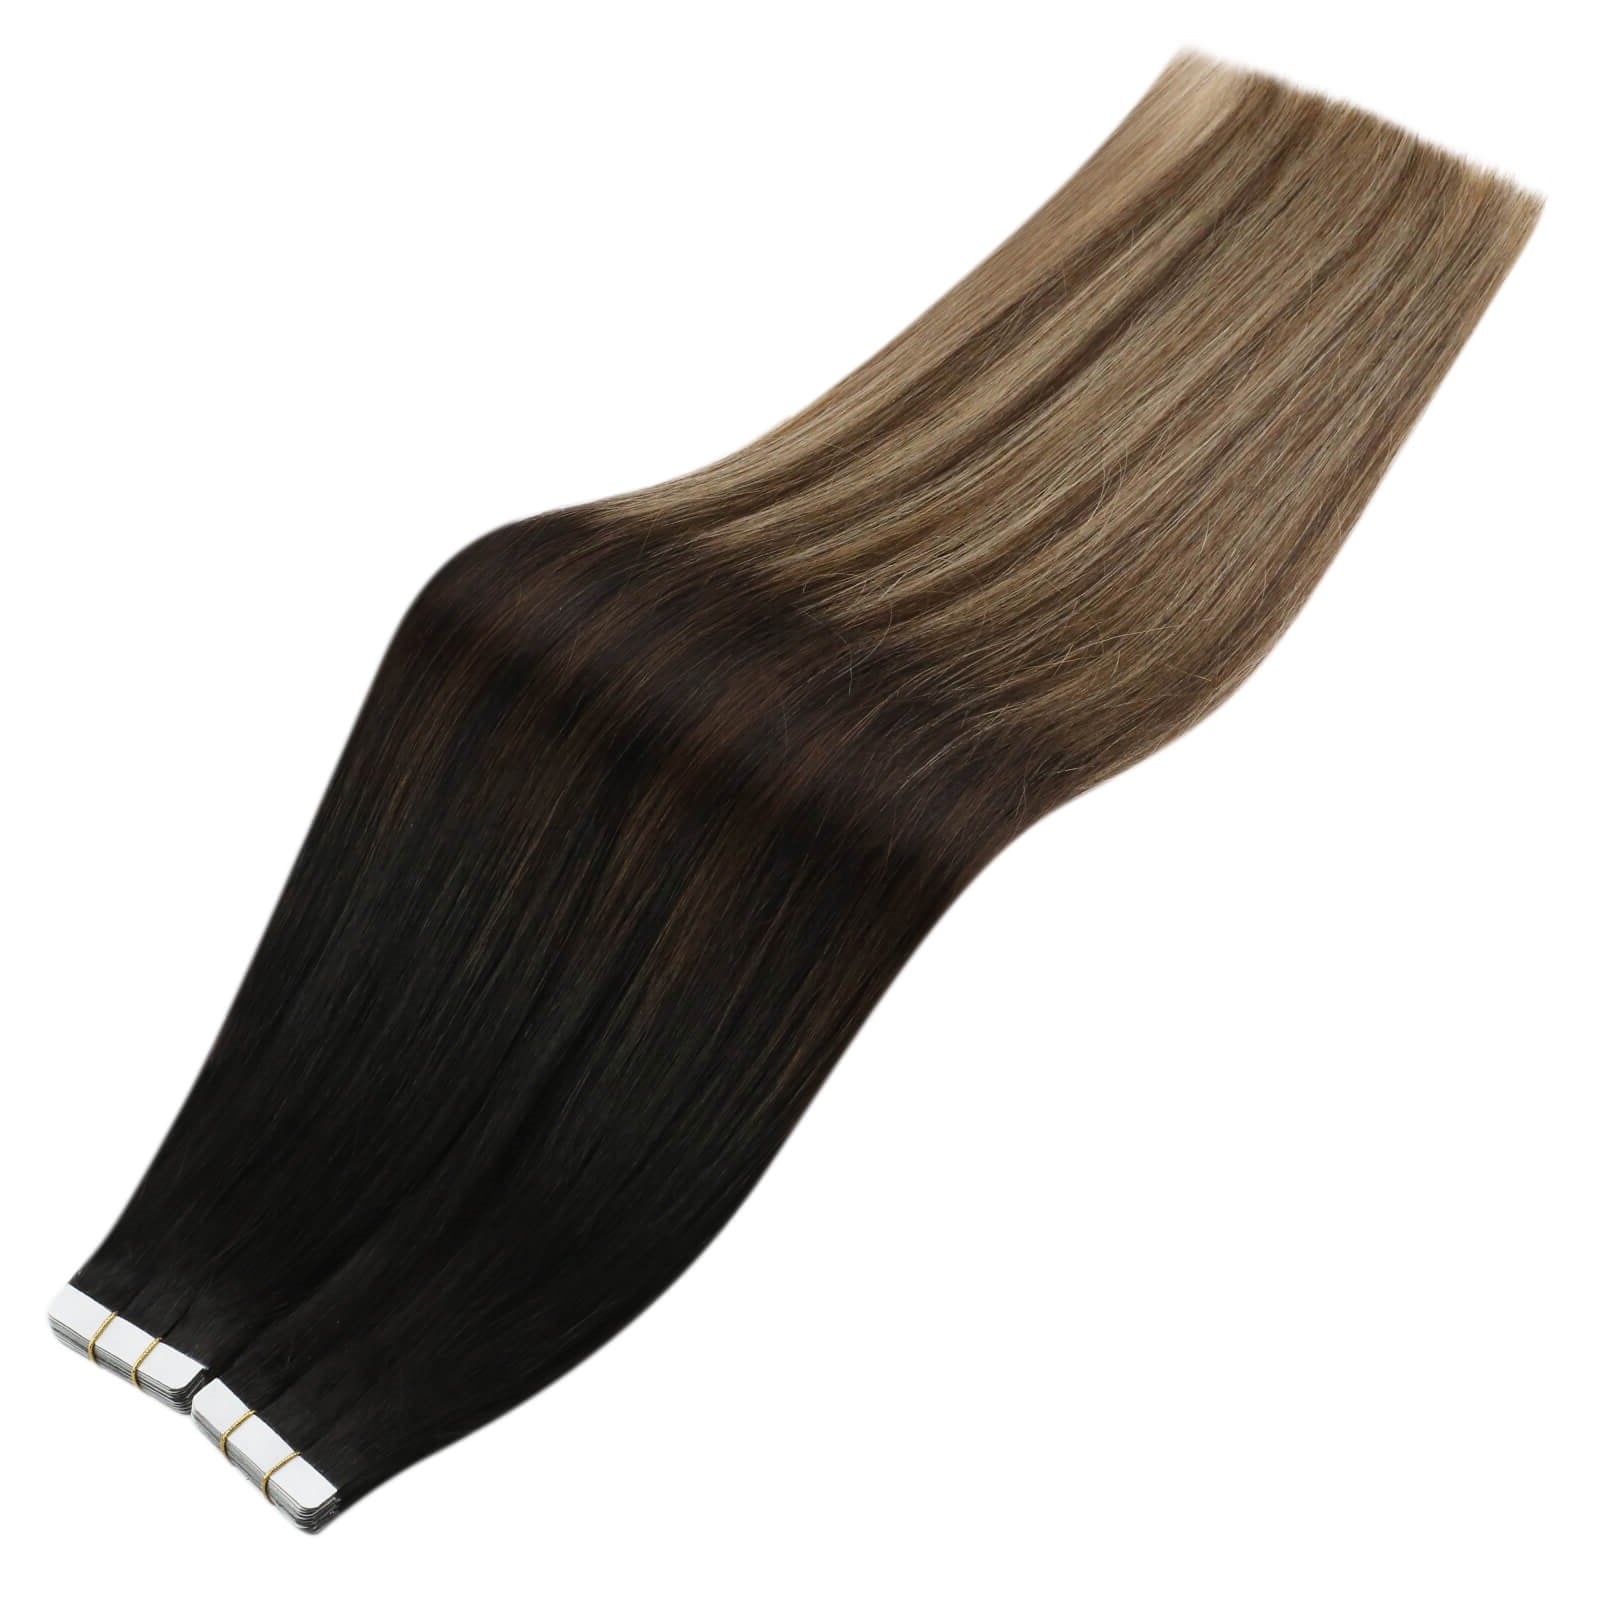 sunny hair tape in extensions hair tape extensions,best hair tape in extensions remy hair extensions tape in 22 inch tape in hair extensions